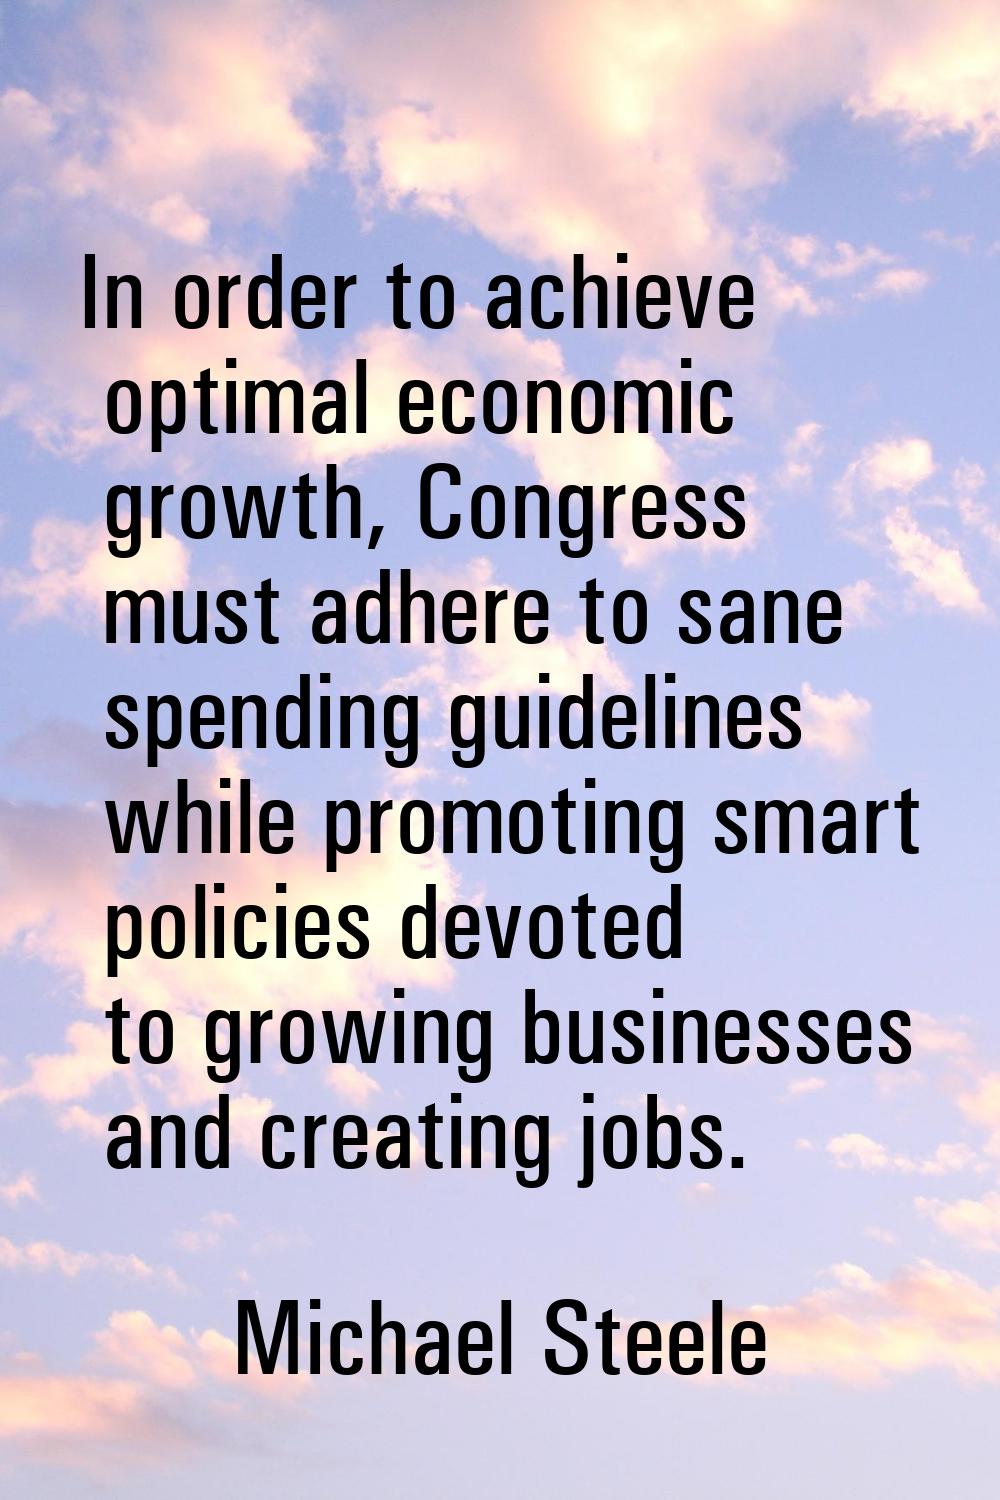 In order to achieve optimal economic growth, Congress must adhere to sane spending guidelines while